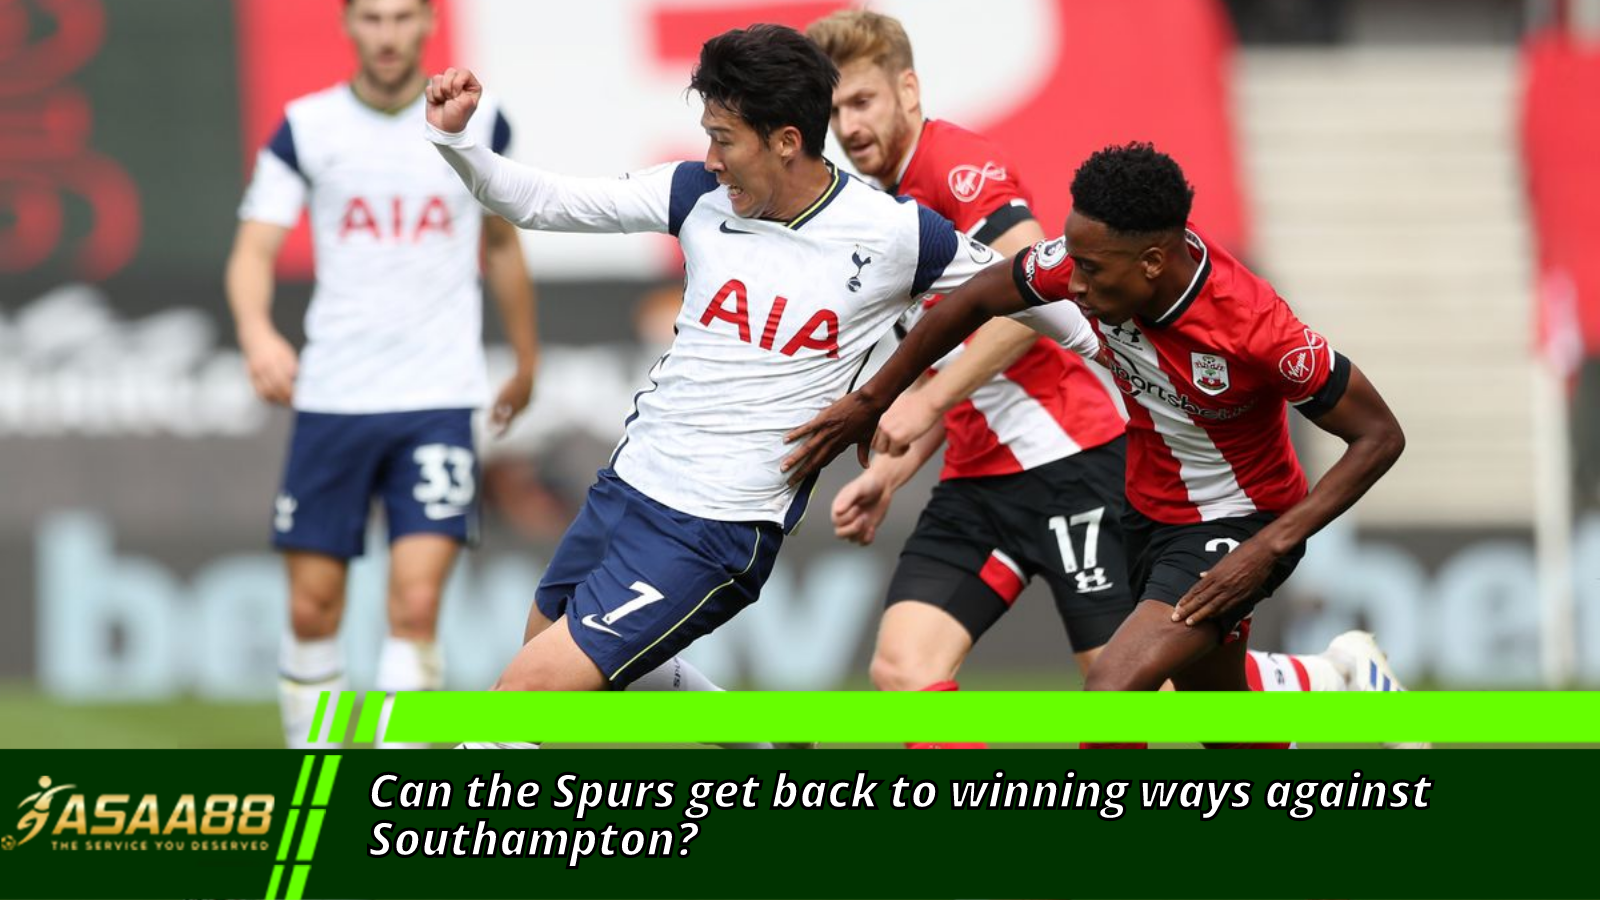 Can the Spurs get back to winning ways against Southampton?